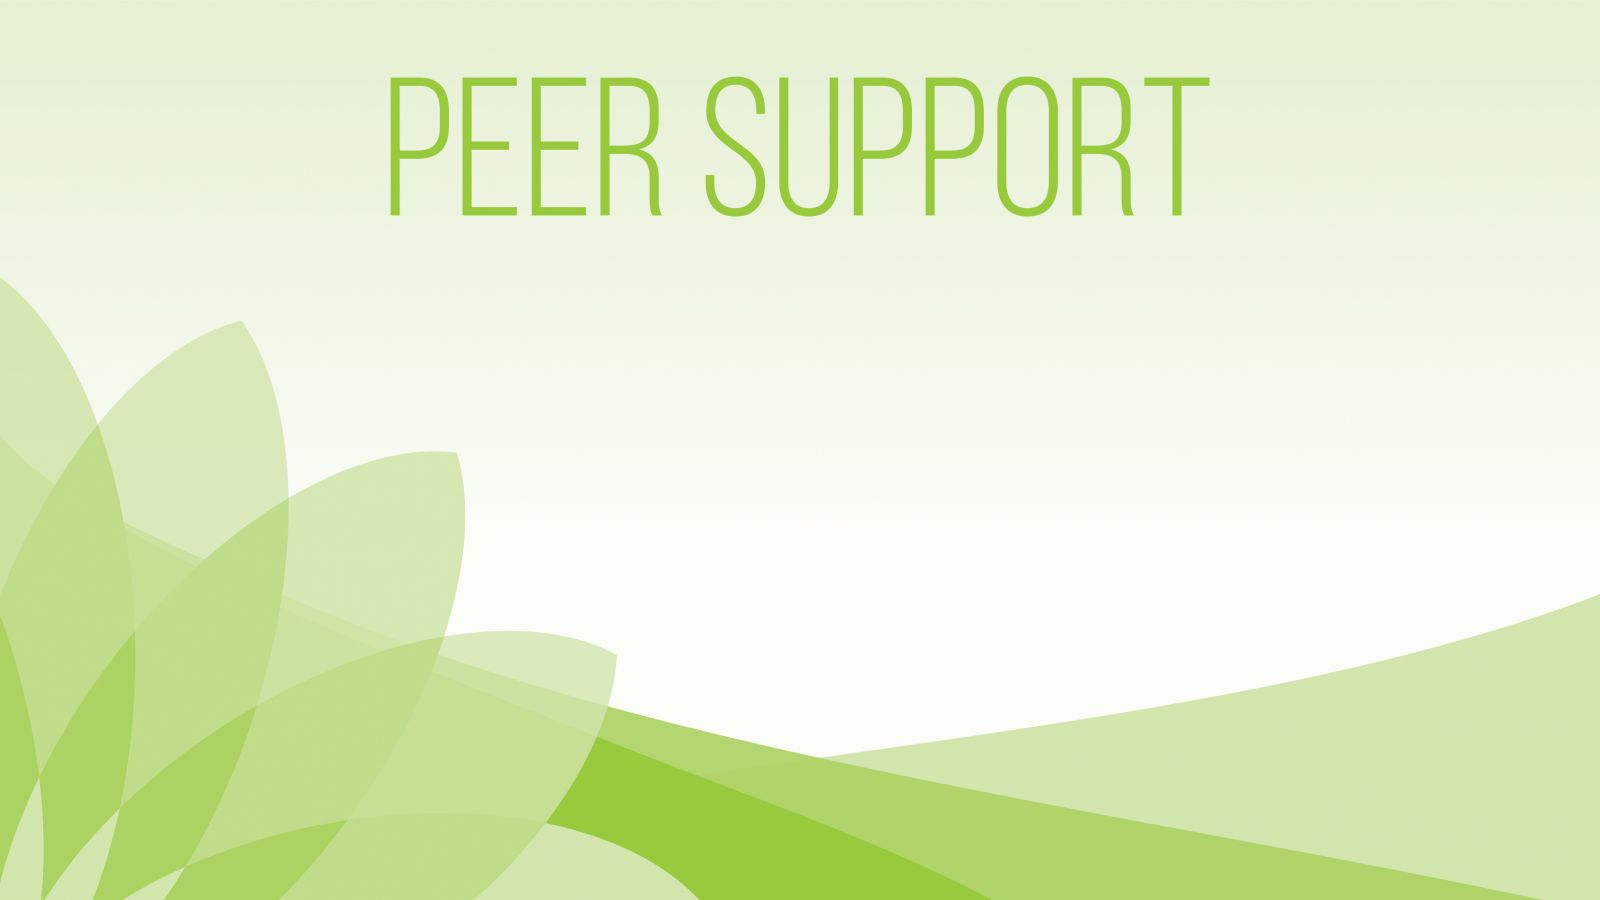 Wellbeing at Oxford - Peer support